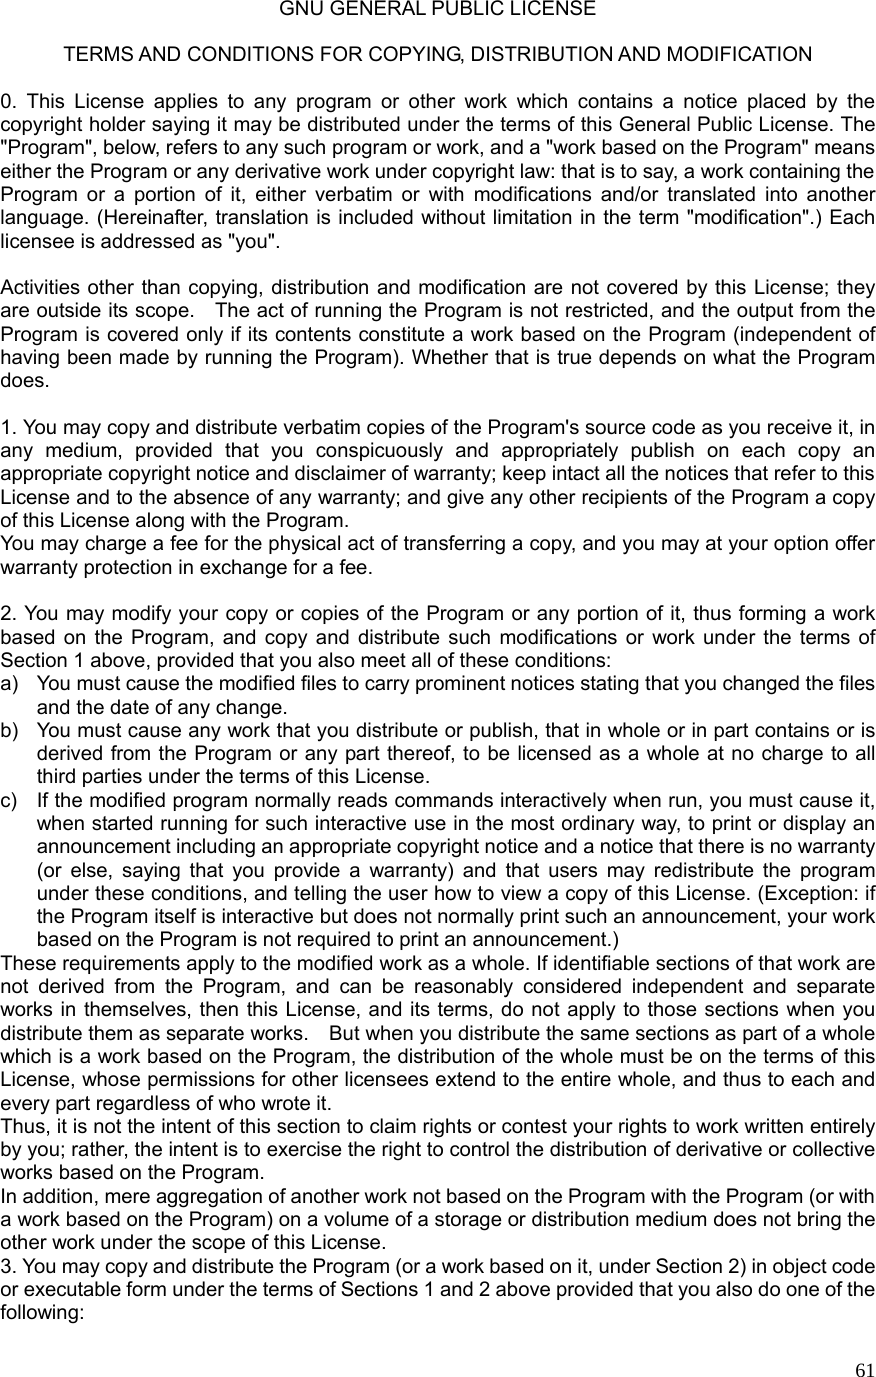  61GNU GENERAL PUBLIC LICENSE  TERMS AND CONDITIONS FOR COPYING, DISTRIBUTION AND MODIFICATION  0. This License applies to any program or other work which contains a notice placed by the copyright holder saying it may be distributed under the terms of this General Public License. The &quot;Program&quot;, below, refers to any such program or work, and a &quot;work based on the Program&quot; means either the Program or any derivative work under copyright law: that is to say, a work containing the Program or a portion of it, either verbatim or with modifications and/or translated into another language. (Hereinafter, translation is included without limitation in the term &quot;modification&quot;.) Each licensee is addressed as &quot;you&quot;.  Activities other than copying, distribution and modification are not covered by this License; they are outside its scope.    The act of running the Program is not restricted, and the output from the Program is covered only if its contents constitute a work based on the Program (independent of having been made by running the Program). Whether that is true depends on what the Program does.  1. You may copy and distribute verbatim copies of the Program&apos;s source code as you receive it, in any medium, provided that you conspicuously and appropriately publish on each copy an appropriate copyright notice and disclaimer of warranty; keep intact all the notices that refer to this License and to the absence of any warranty; and give any other recipients of the Program a copy of this License along with the Program. You may charge a fee for the physical act of transferring a copy, and you may at your option offer warranty protection in exchange for a fee.  2. You may modify your copy or copies of the Program or any portion of it, thus forming a work based on the Program, and copy and distribute such modifications or work under the terms of Section 1 above, provided that you also meet all of these conditions: a)  You must cause the modified files to carry prominent notices stating that you changed the files and the date of any change. b)  You must cause any work that you distribute or publish, that in whole or in part contains or is derived from the Program or any part thereof, to be licensed as a whole at no charge to all third parties under the terms of this License. c)  If the modified program normally reads commands interactively when run, you must cause it, when started running for such interactive use in the most ordinary way, to print or display an announcement including an appropriate copyright notice and a notice that there is no warranty (or else, saying that you provide a warranty) and that users may redistribute the program under these conditions, and telling the user how to view a copy of this License. (Exception: if the Program itself is interactive but does not normally print such an announcement, your work based on the Program is not required to print an announcement.) These requirements apply to the modified work as a whole. If identifiable sections of that work are not derived from the Program, and can be reasonably considered independent and separate works in themselves, then this License, and its terms, do not apply to those sections when you distribute them as separate works.    But when you distribute the same sections as part of a whole which is a work based on the Program, the distribution of the whole must be on the terms of this License, whose permissions for other licensees extend to the entire whole, and thus to each and every part regardless of who wrote it. Thus, it is not the intent of this section to claim rights or contest your rights to work written entirely by you; rather, the intent is to exercise the right to control the distribution of derivative or collective works based on the Program. In addition, mere aggregation of another work not based on the Program with the Program (or with a work based on the Program) on a volume of a storage or distribution medium does not bring the other work under the scope of this License. 3. You may copy and distribute the Program (or a work based on it, under Section 2) in object code or executable form under the terms of Sections 1 and 2 above provided that you also do one of the following: 